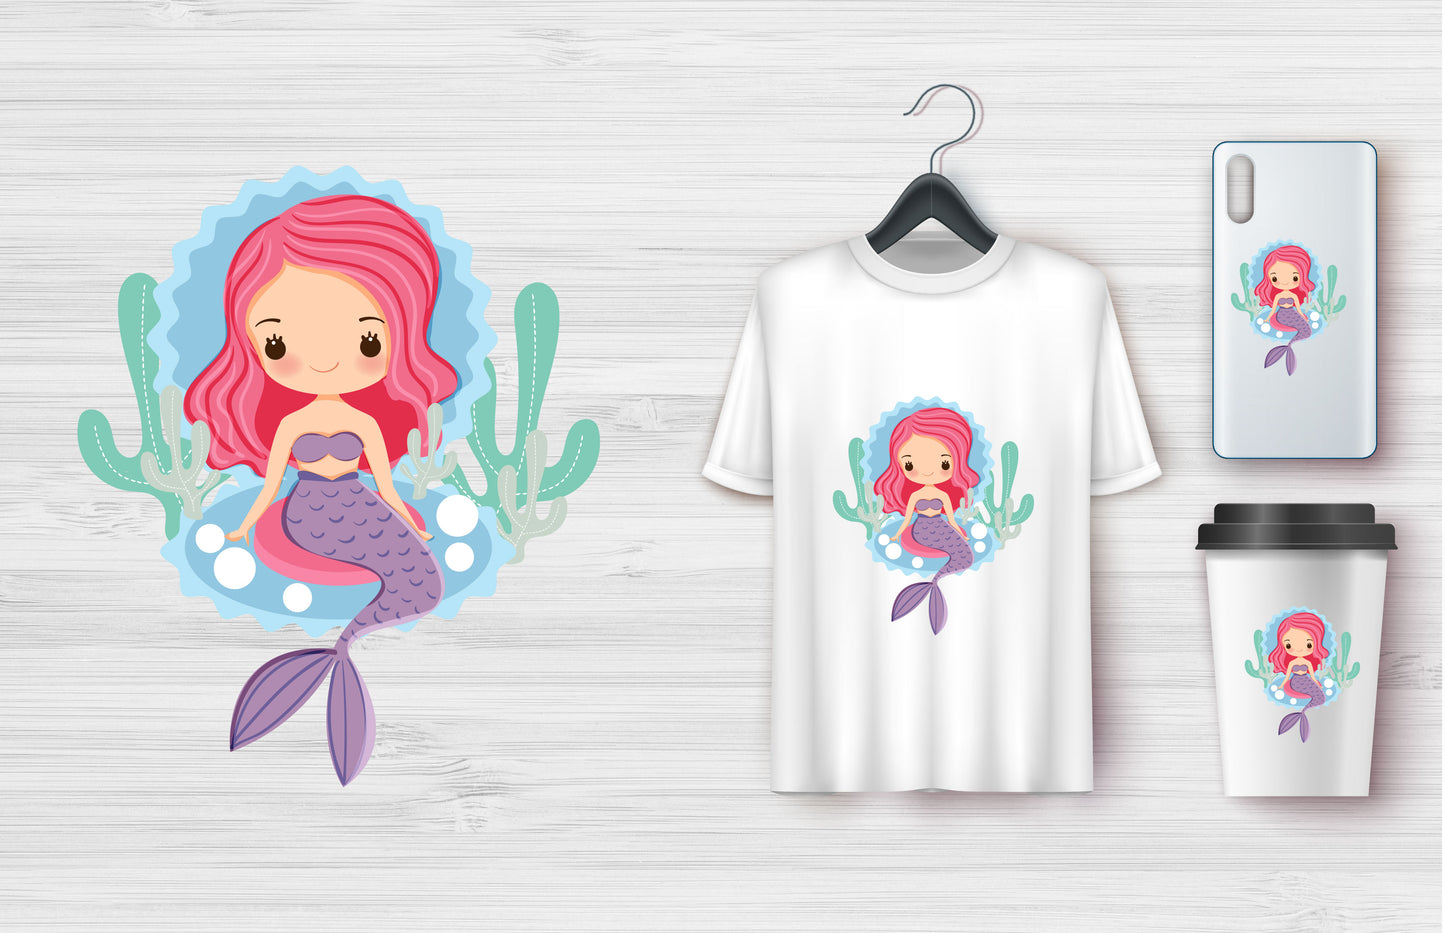 Cute Mermaids – A Whimsical Underwater Illustration Collection.